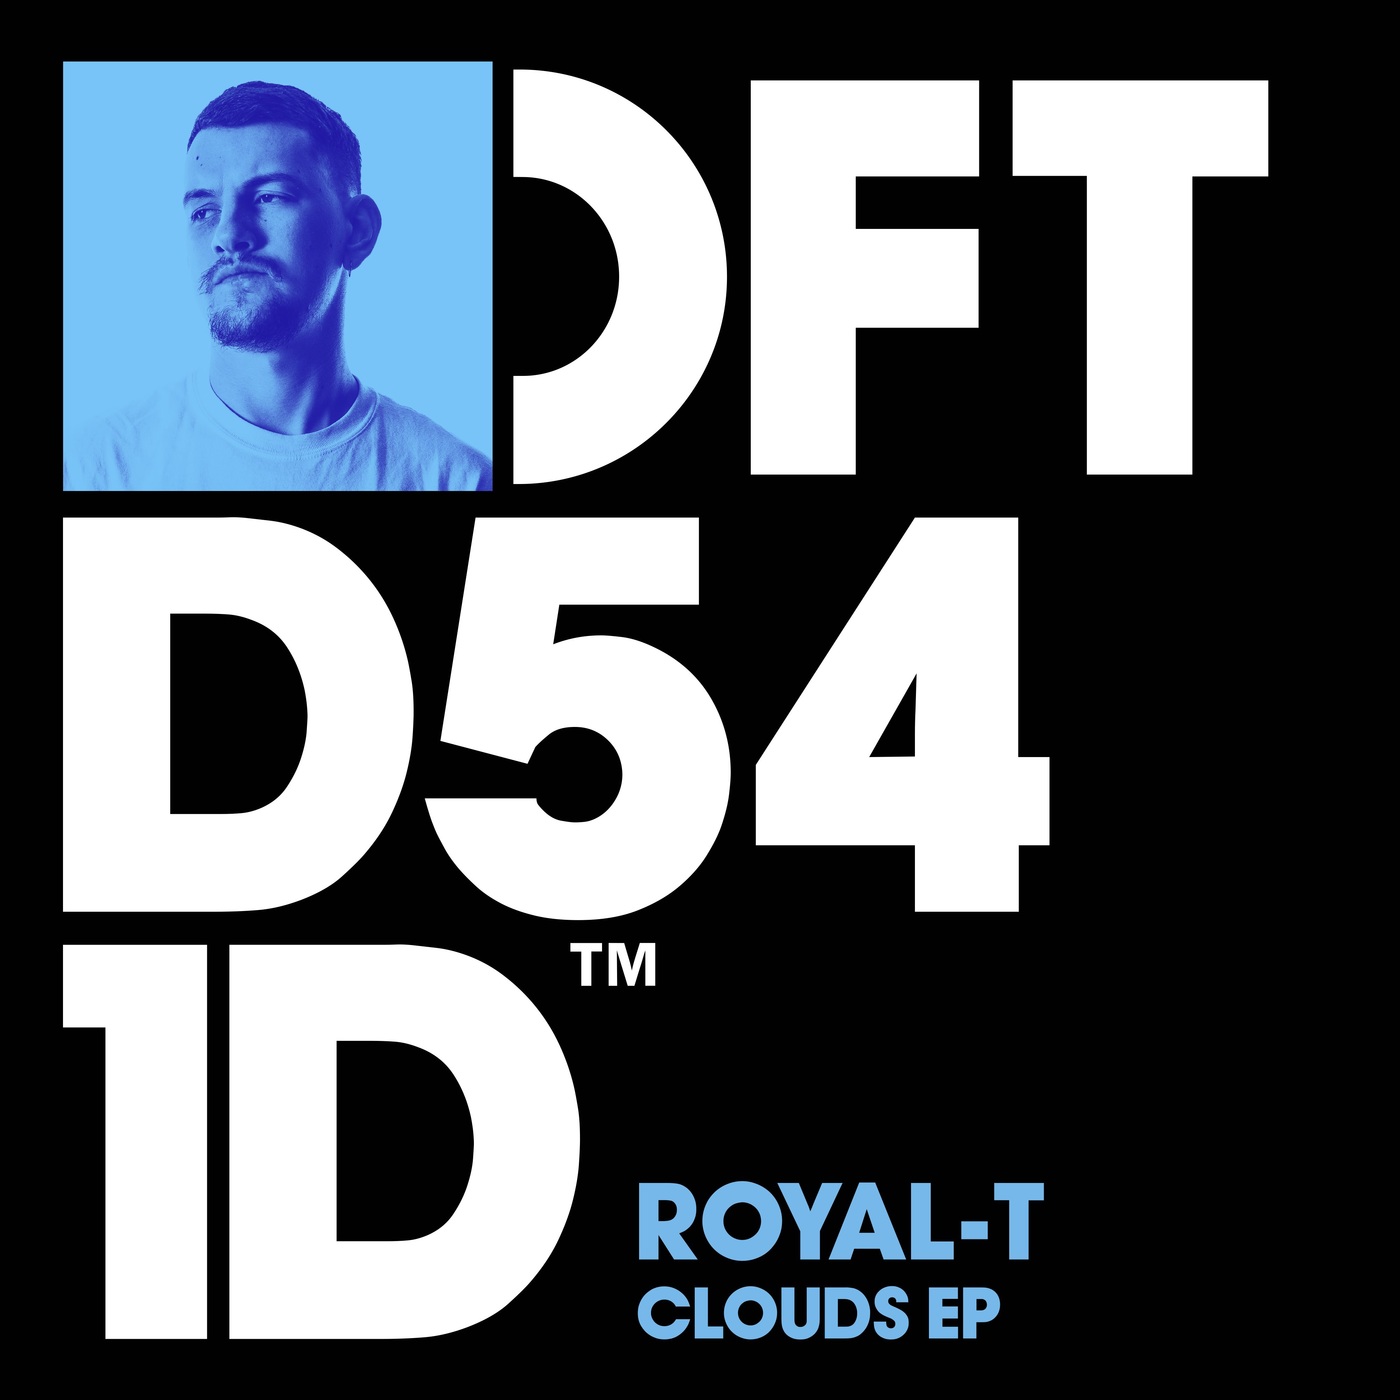 Royal-T - Clouds EP / Defected Records